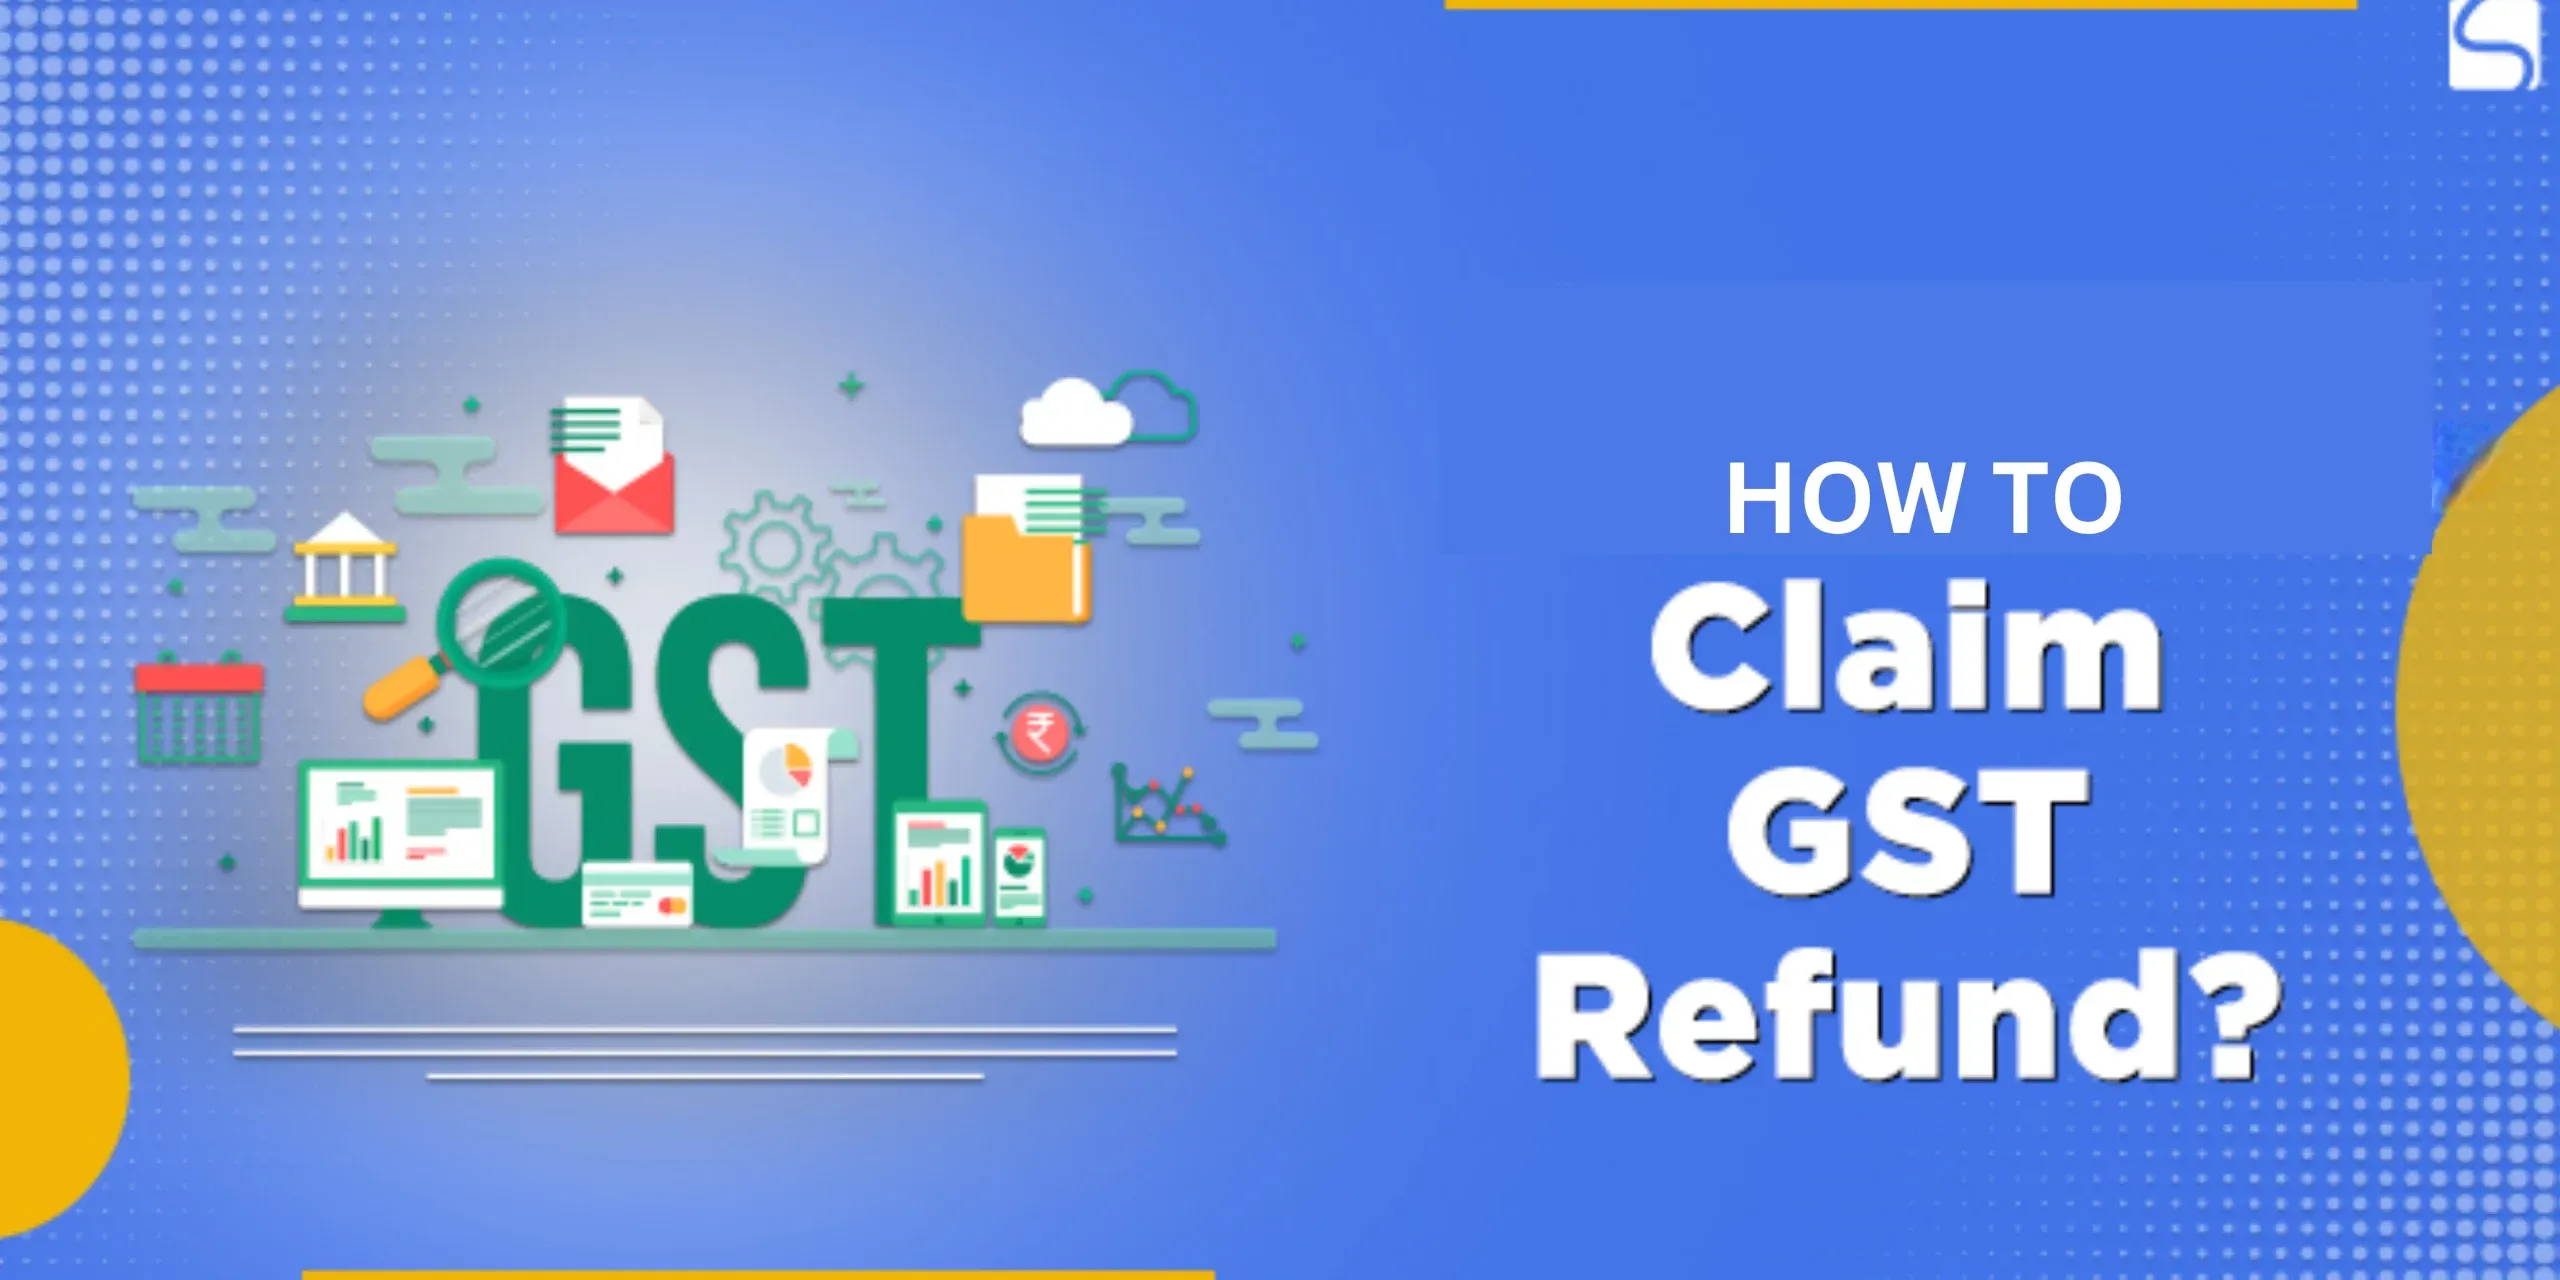 Step-by-Step Guide to Claiming GST Refunds in India